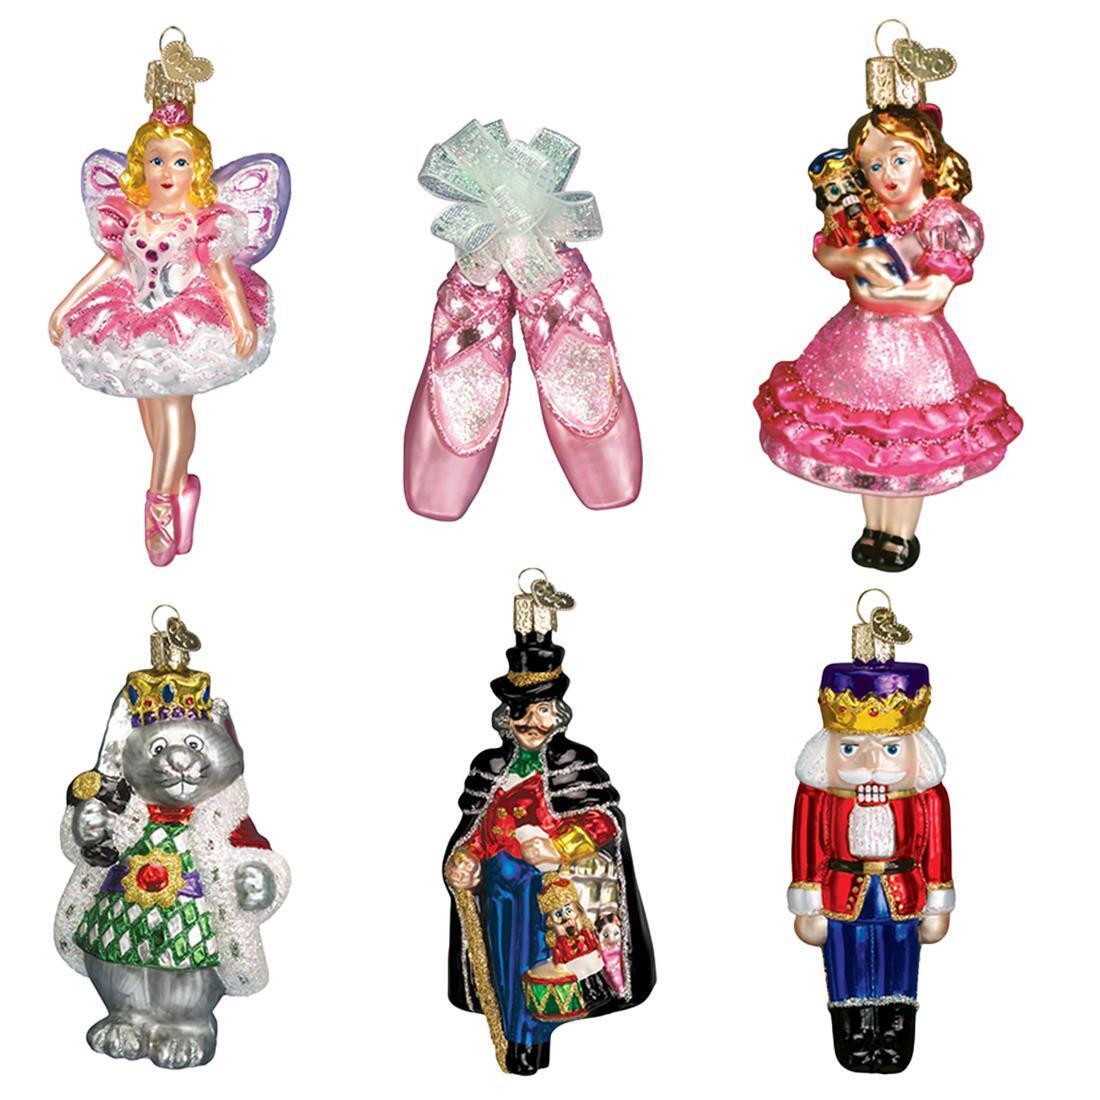 Old World Christmas: Nutcracker Suite Collection Hanging Orn Set of 6 14013-OWC